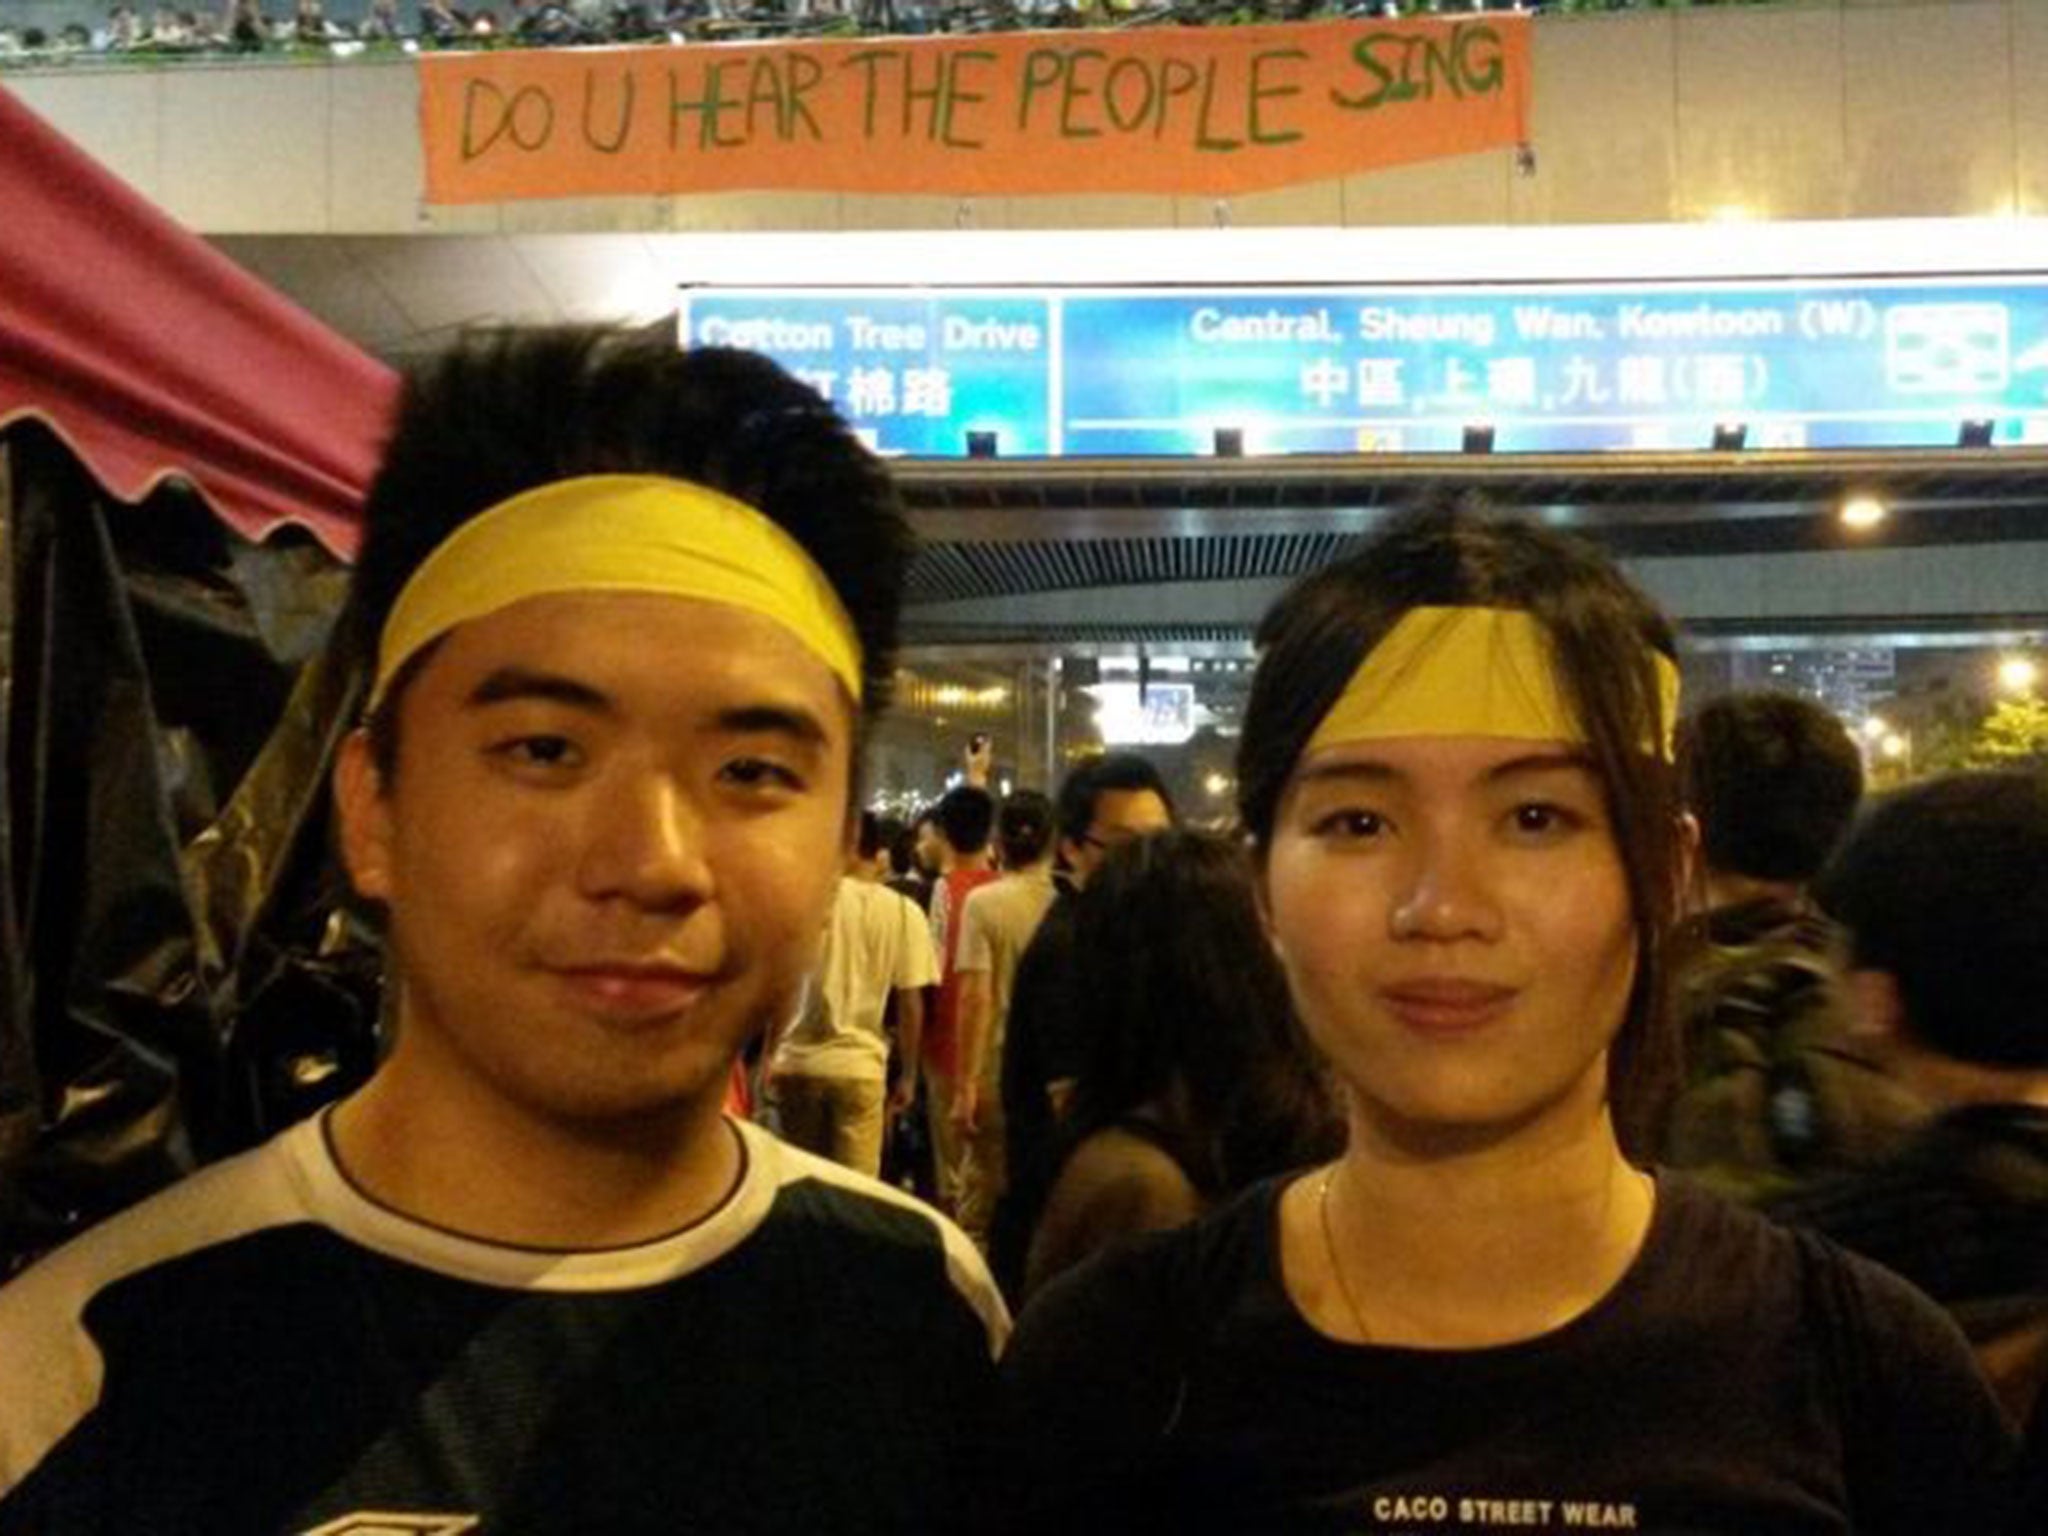 James Fong and Chloe Wong distributed yellow ribbons – a symbol for the struggle – to protesters